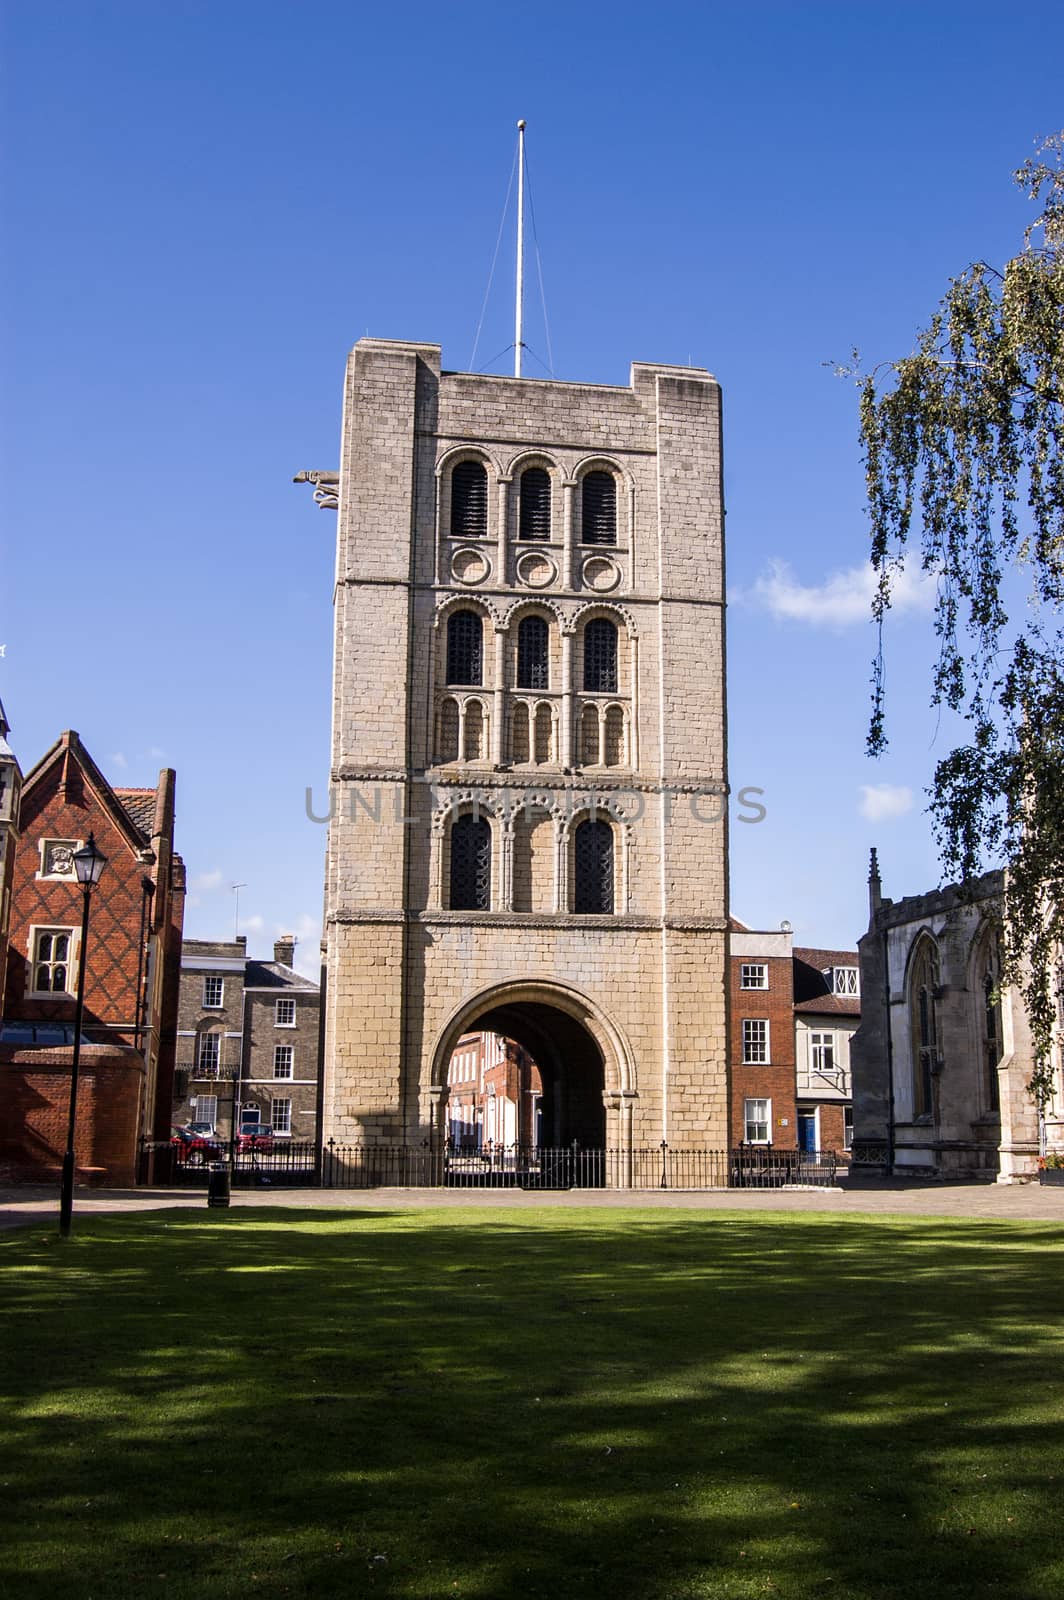 The landmark Norman tower in Bury St Edmunds, Suffolk. Built in the 12th century as a gateway to the Abbey and a belltower.